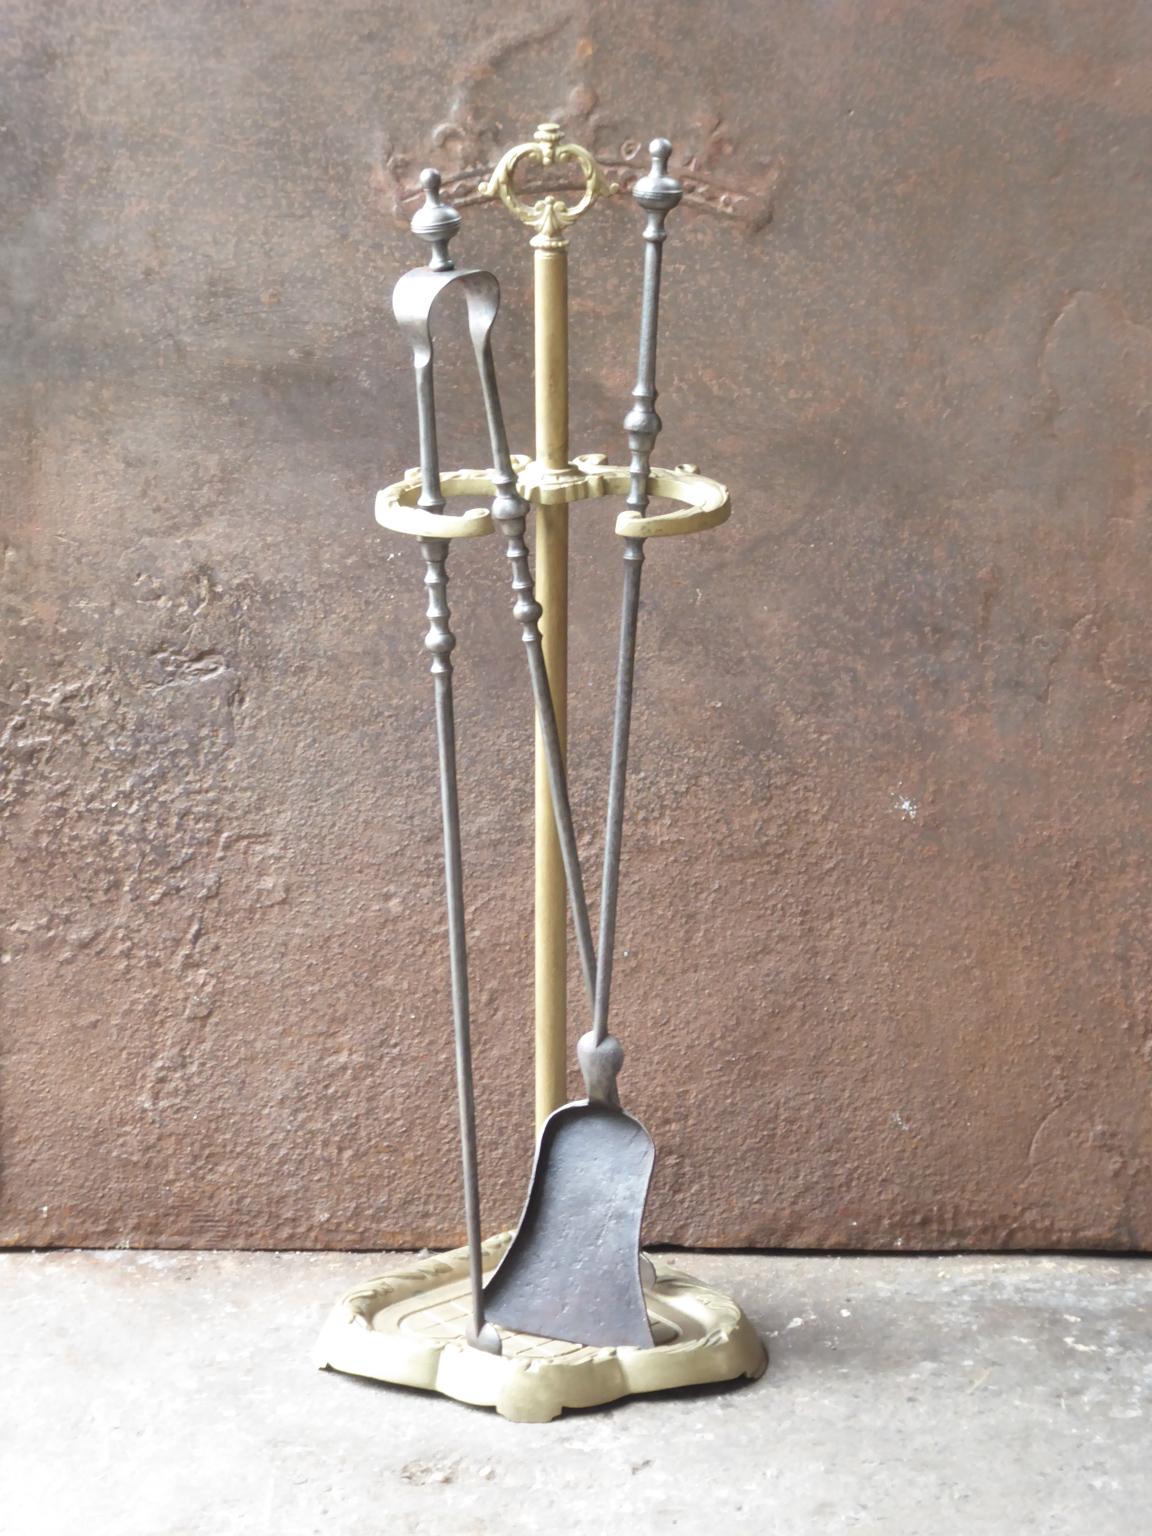 19th-early 20th century French Napoleon III fireplace tool set, fire irons. Made of wrought iron and brass. The toolset consists of a stand and two fire irons. It is in a good condition and is fully functional.







 